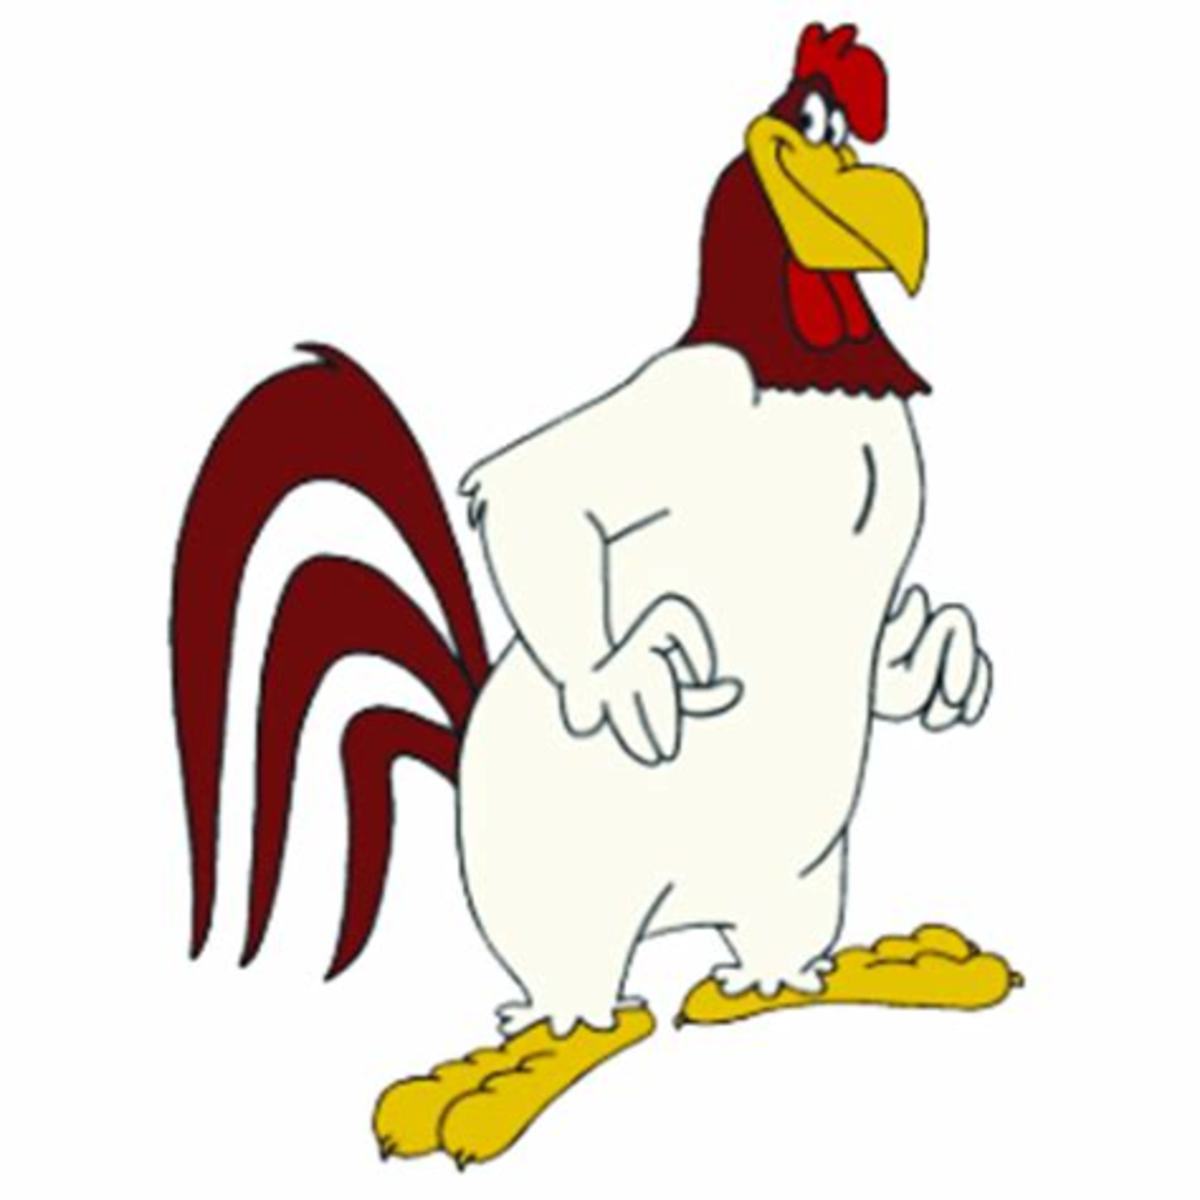 Foghorn Leghorn, "I say, I say, there's a whole lotta them bad Actors 'round here"